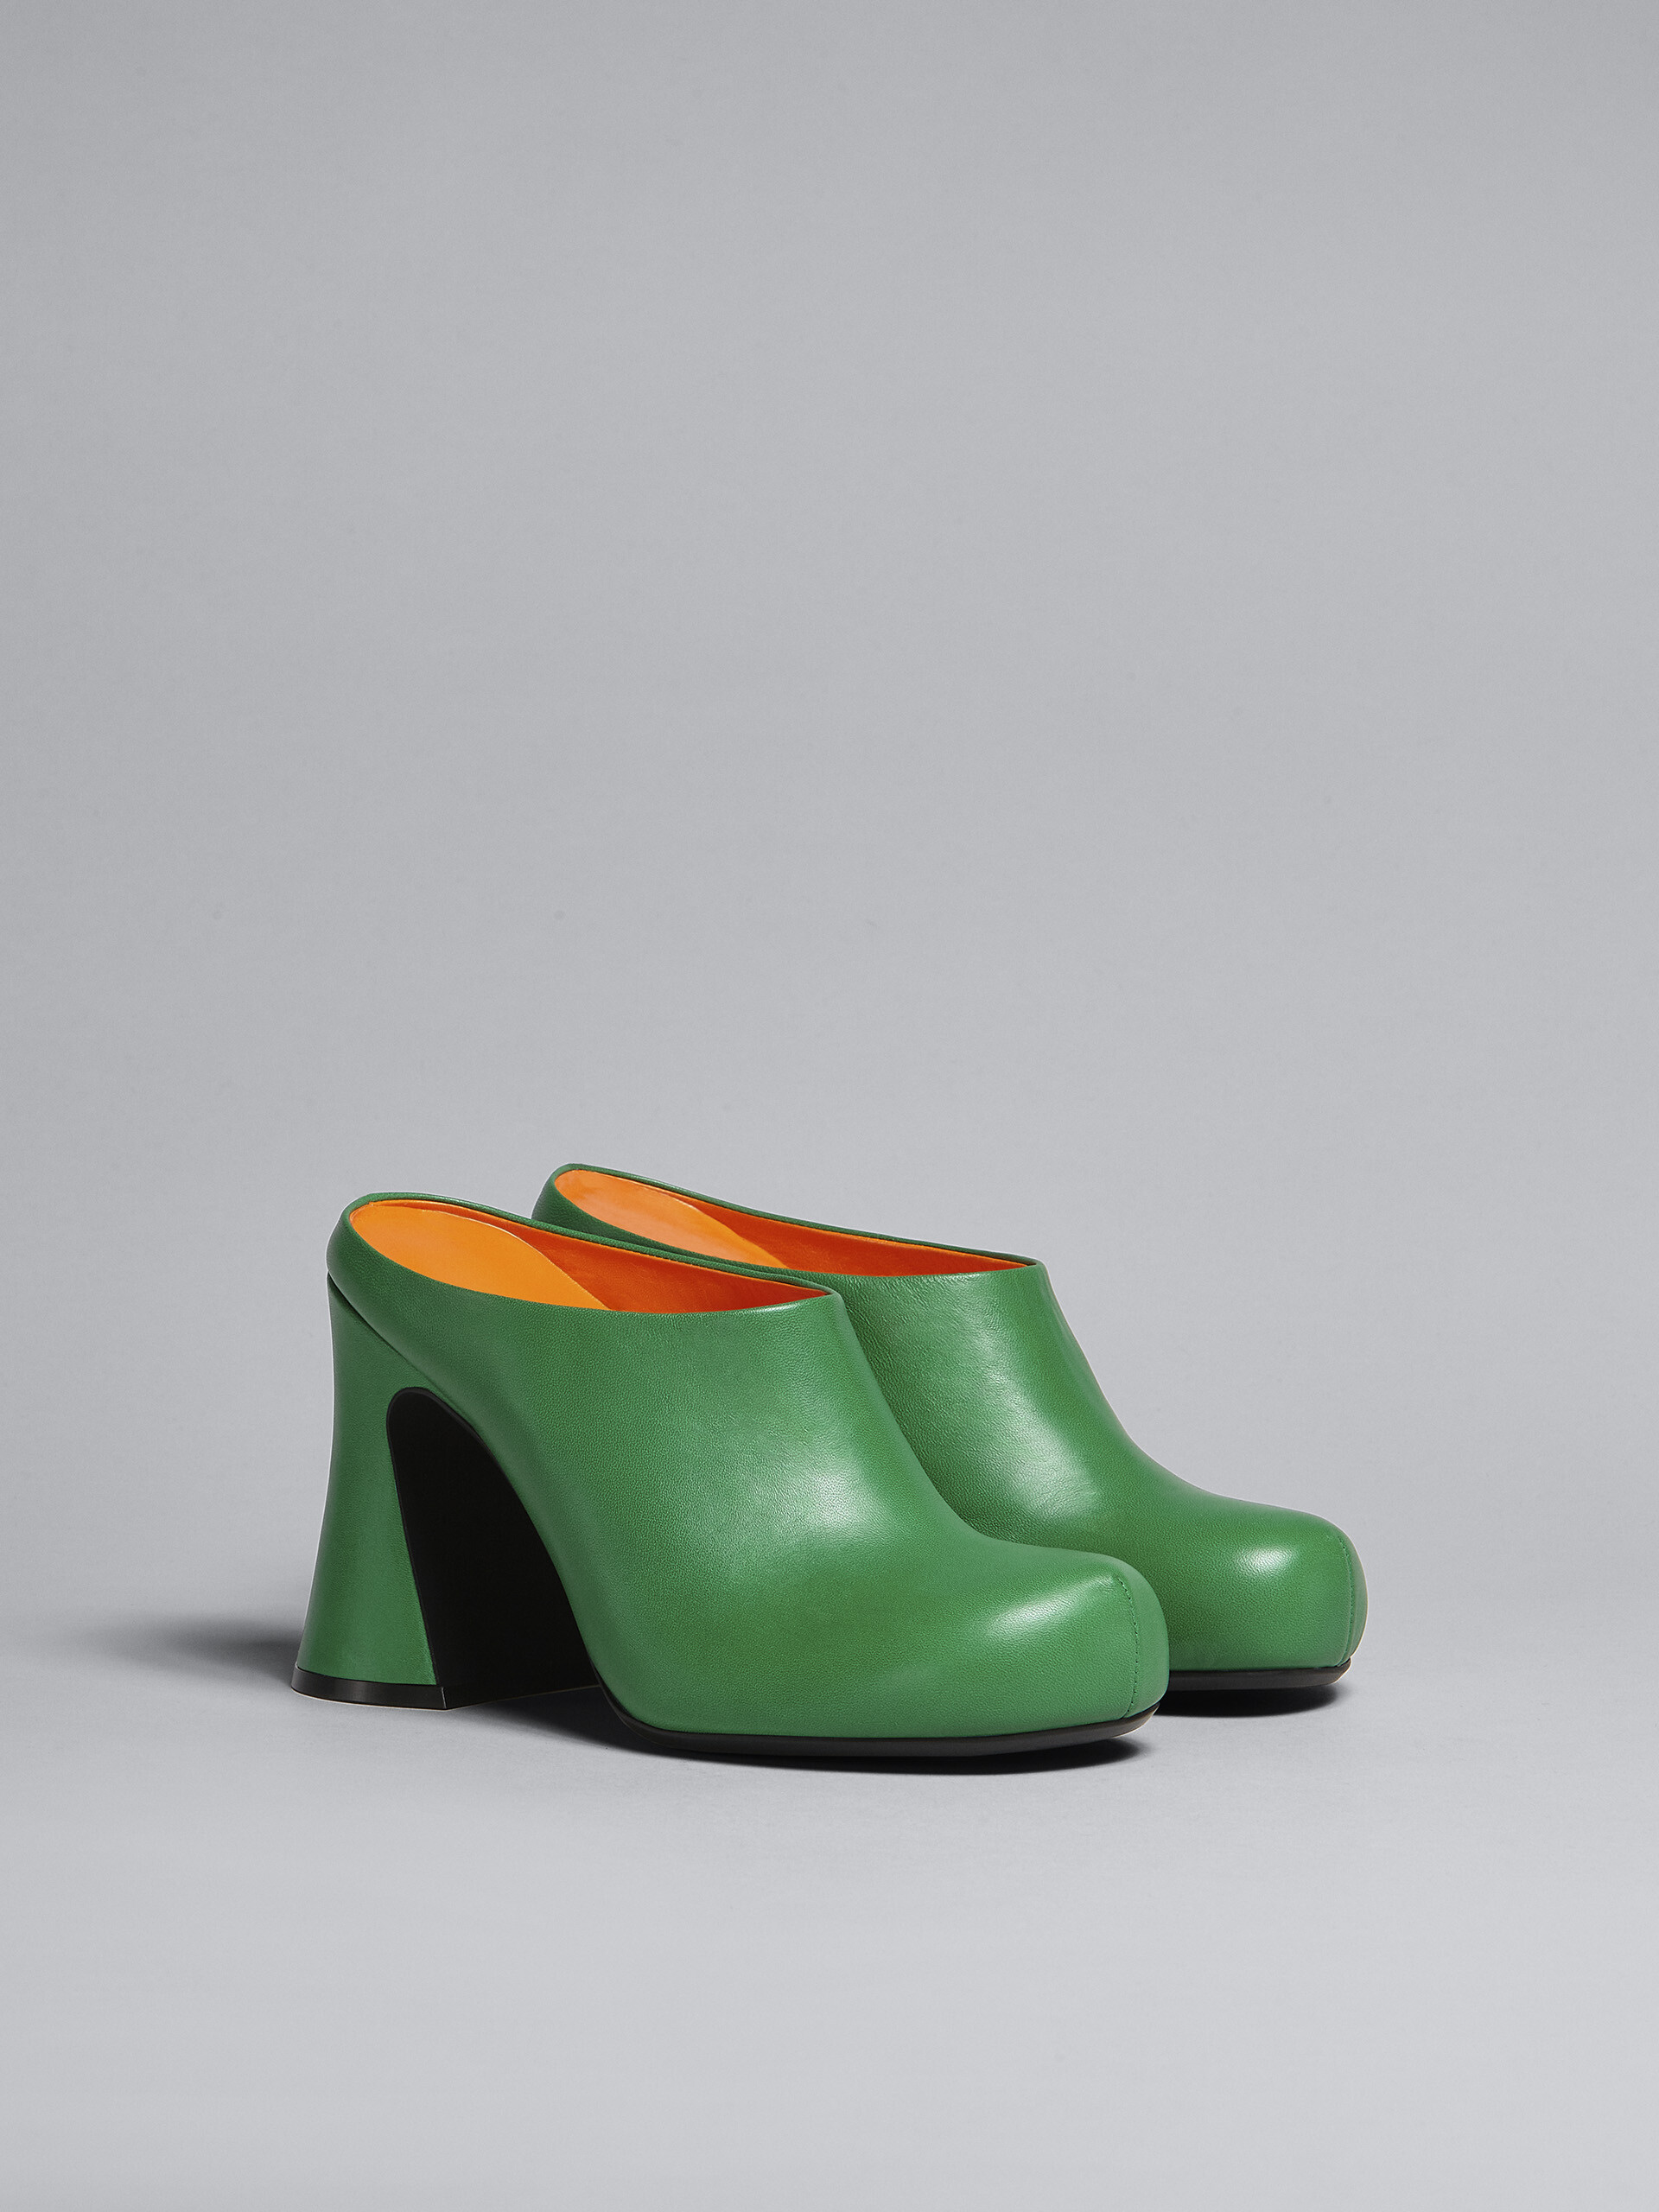 Green leather sabot - Clogs - Image 2